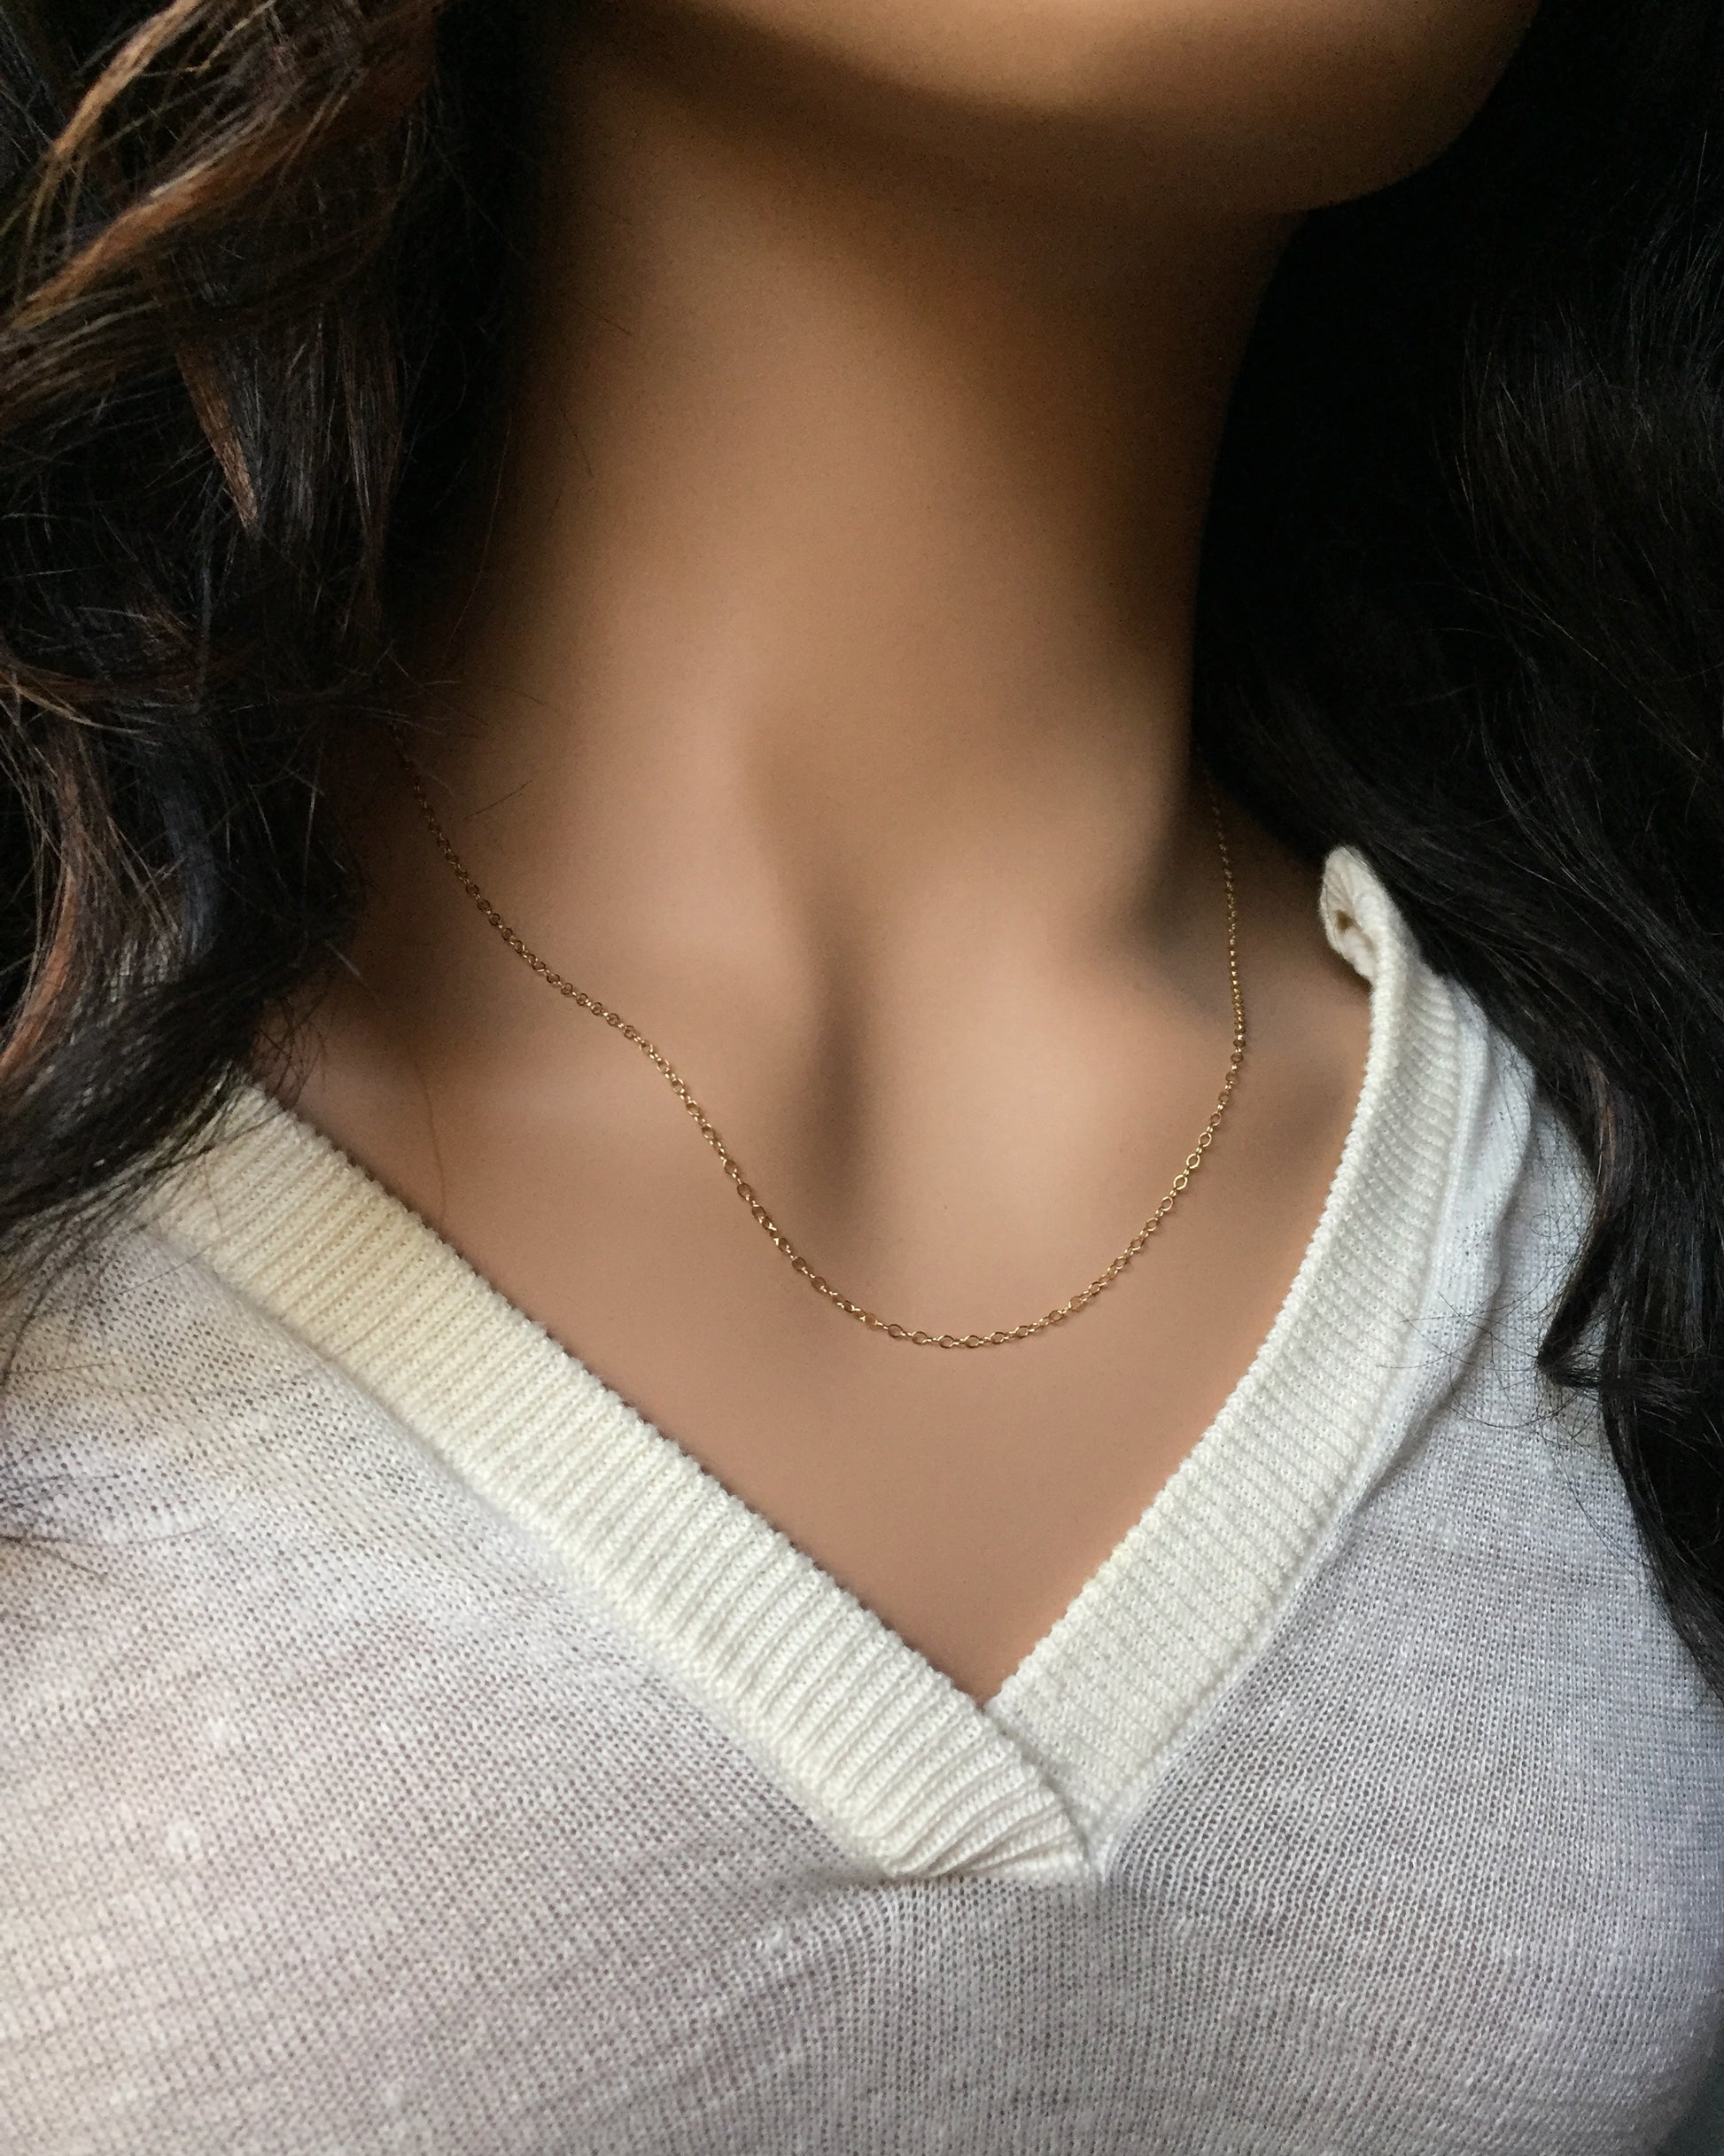 Dainty Chain Necklace | Basic Chain Necklace in Gold Filled or Sterling Silver | IB Jewelry